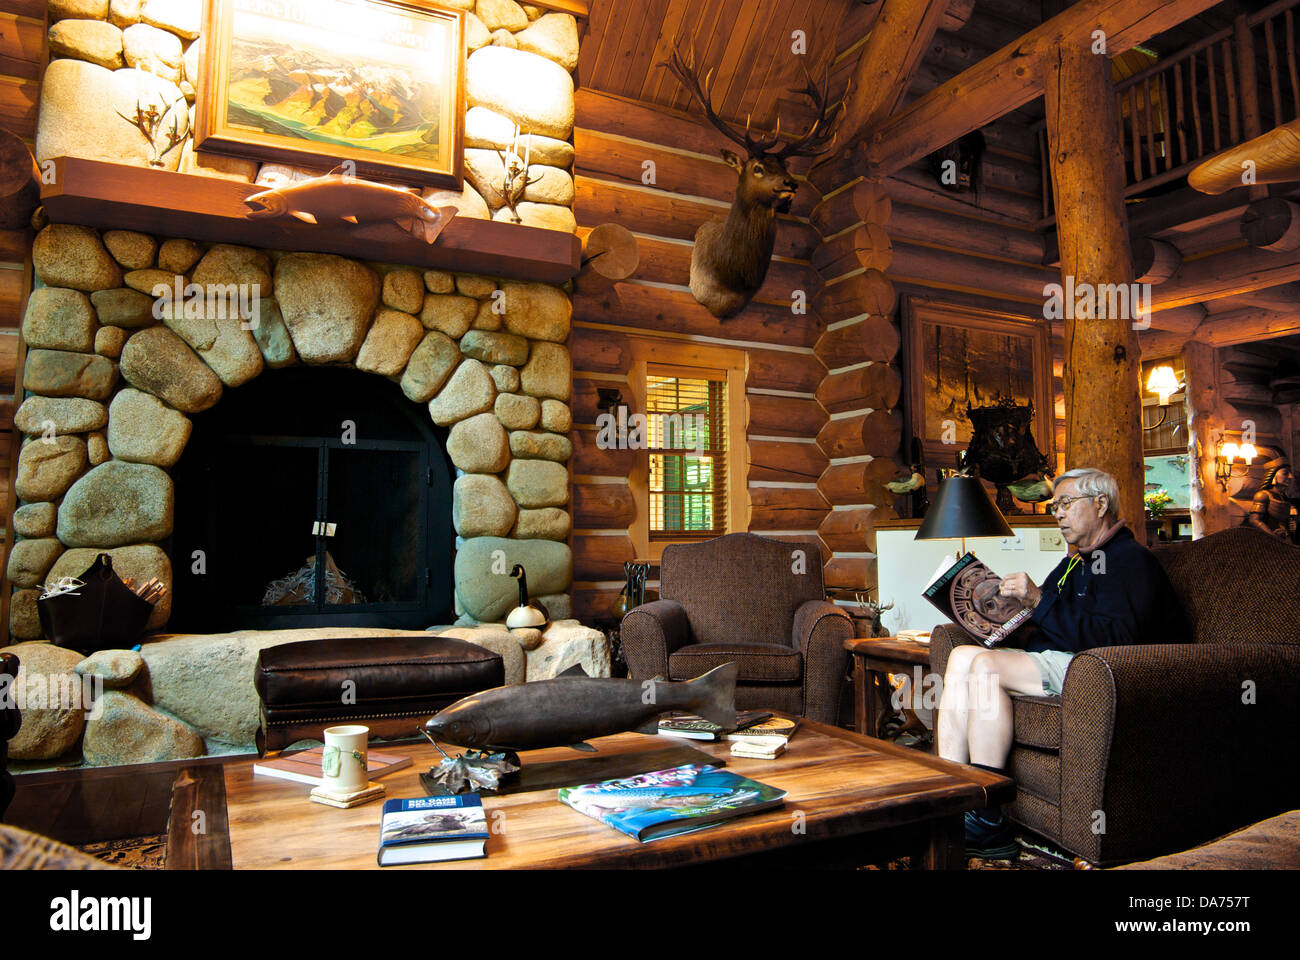 Asian man reading log construction wood plank walls stone fireplace great room Gold River Lodge BC Stock Photo